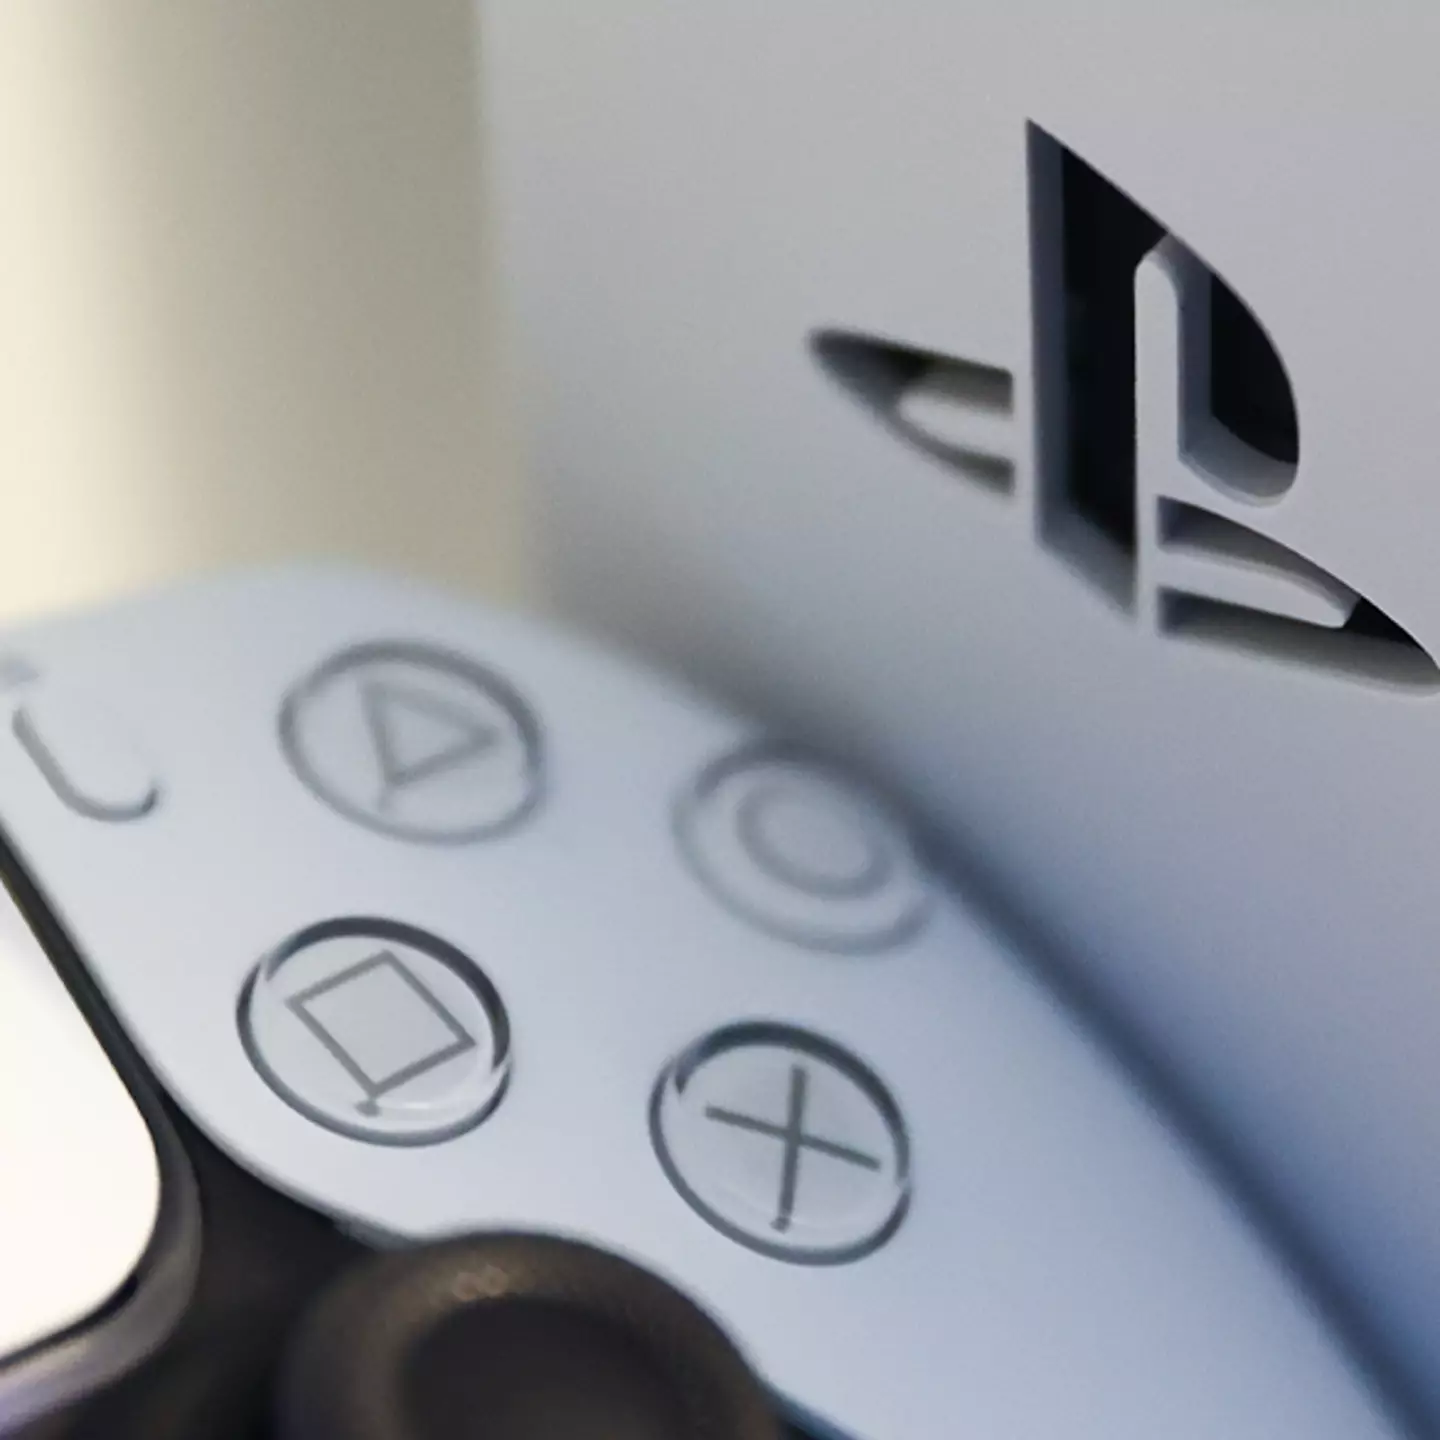 PlayStation 5 owners urged to immediately change these settings for best experience